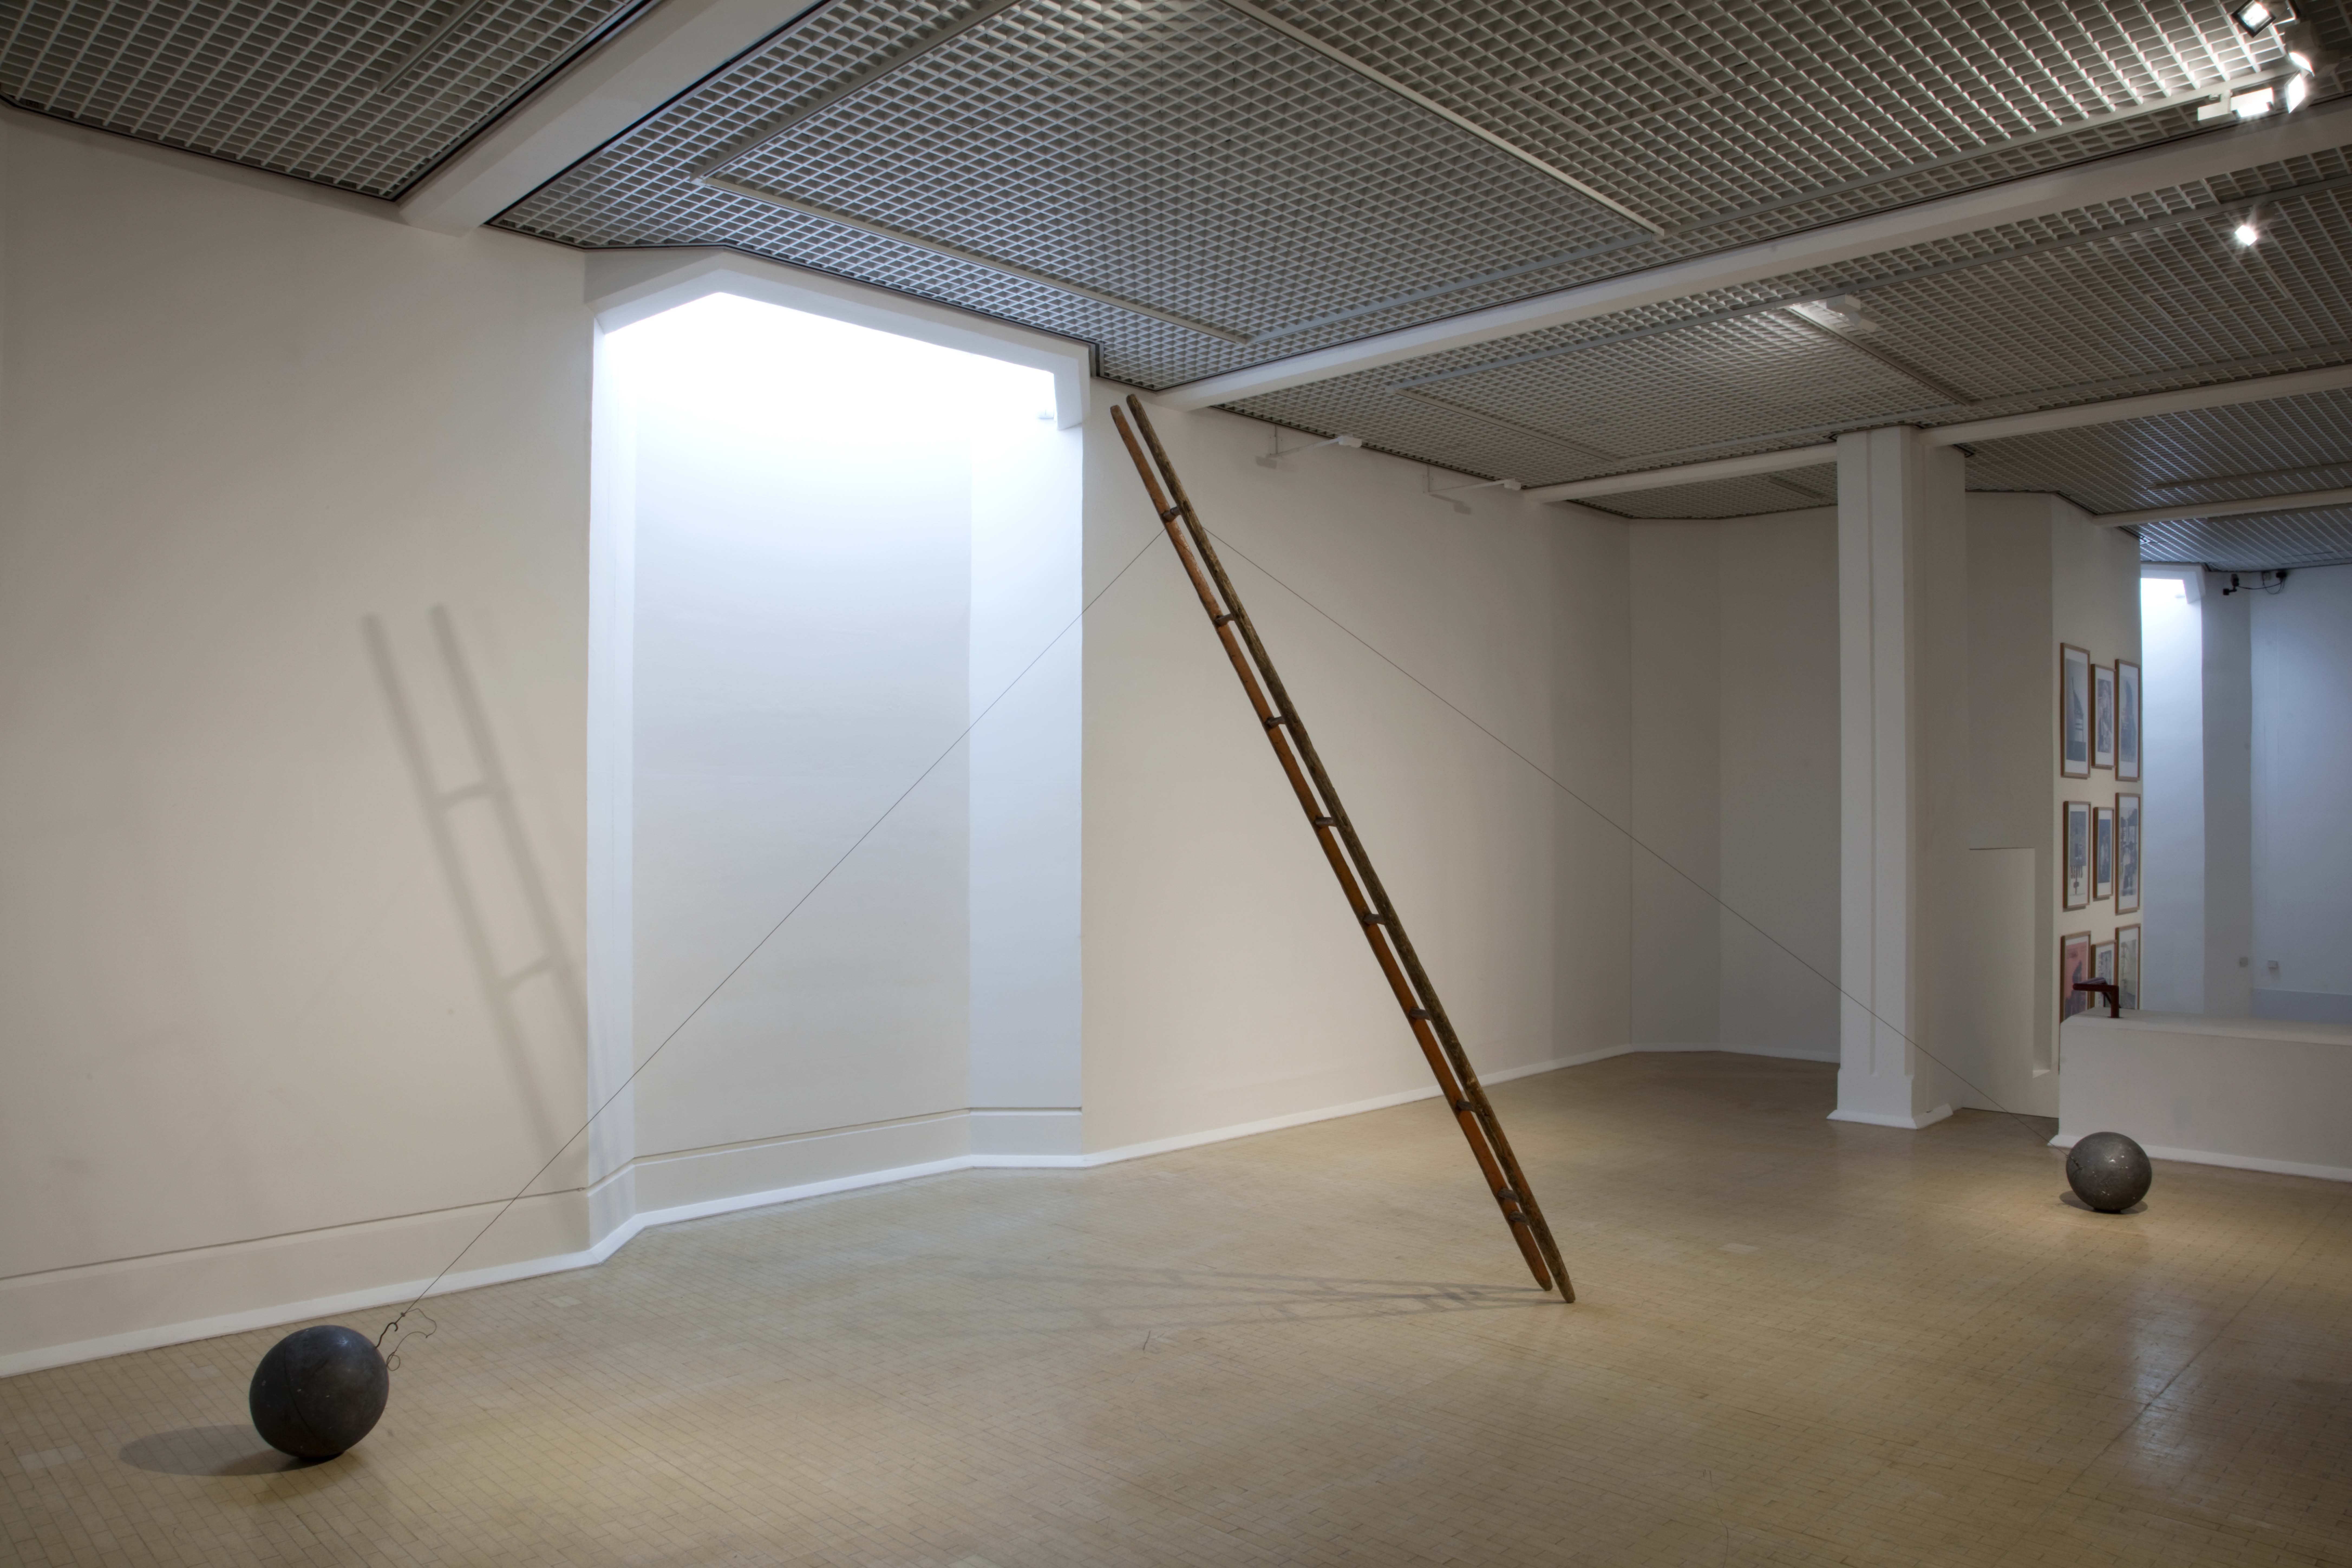 A gallery with white walls and wooden floor. Several sculptures can be seen in the room, the main focus is a ladder leading up to the ceiling. The ladder is pinned down by round ball weights and wire.